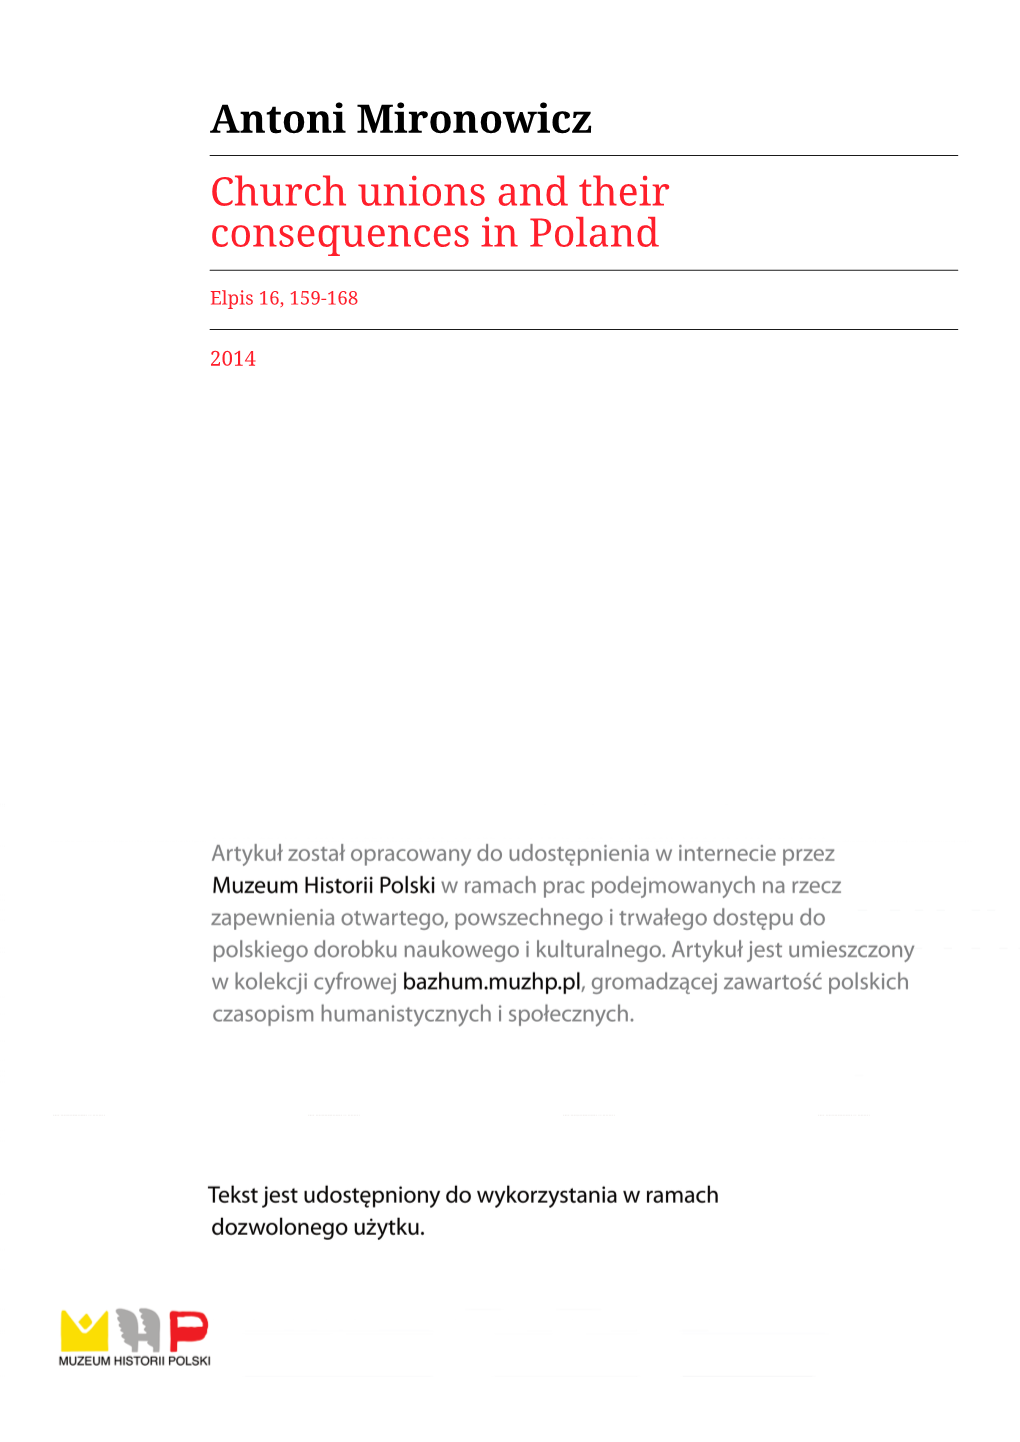 Church Unions and Their Consequences in Poland